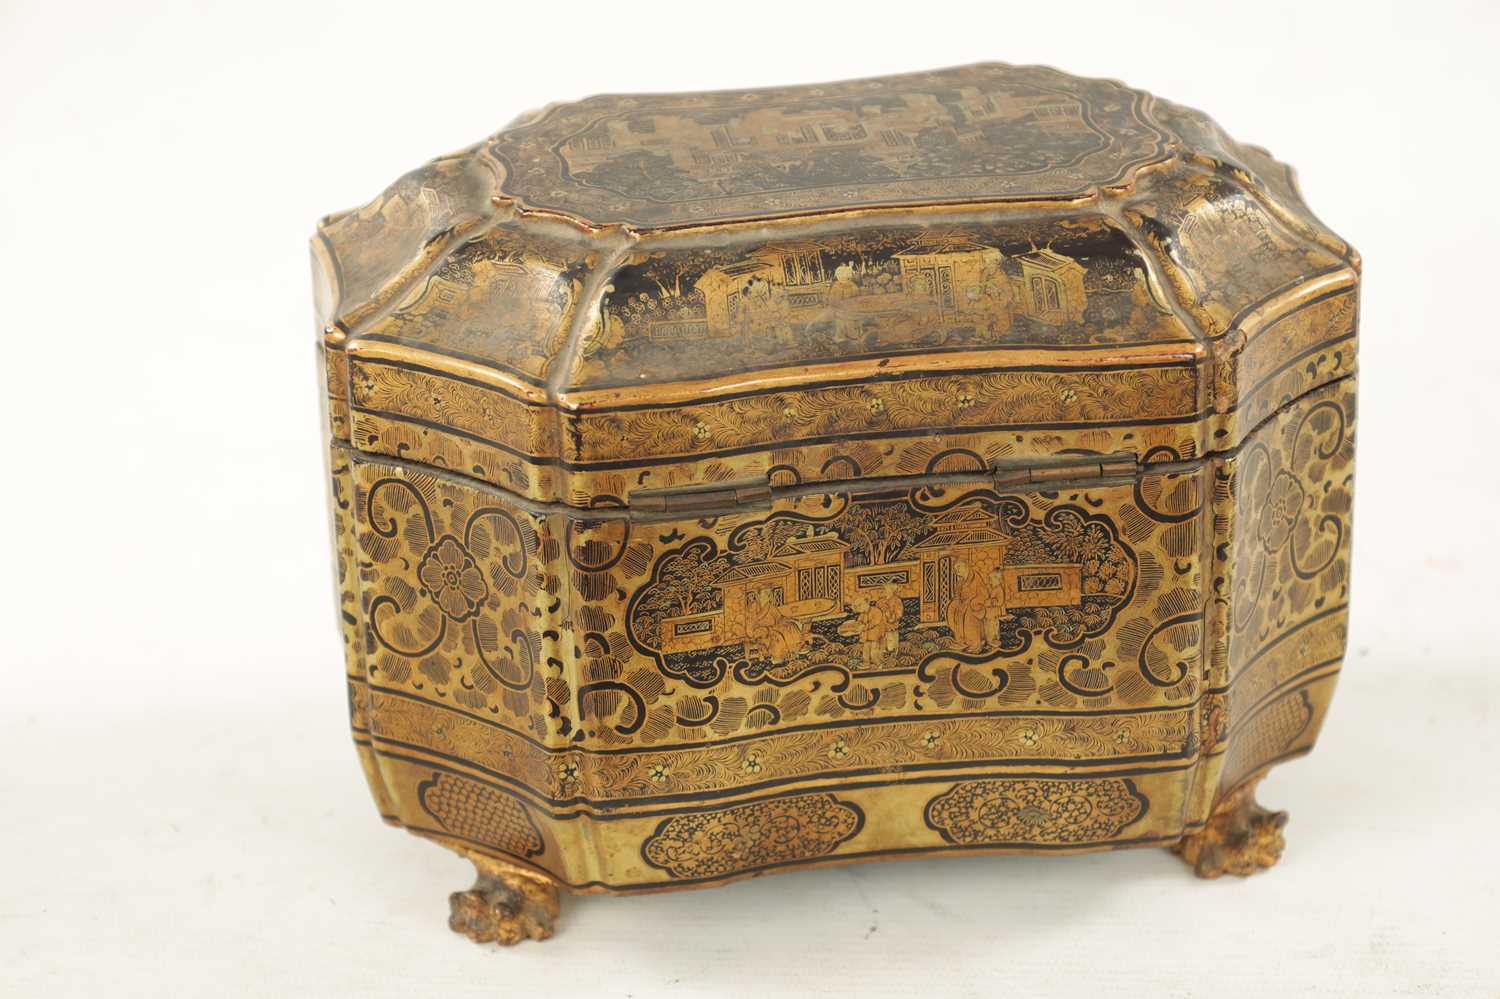 A GOOD 19TH CENTURY CHINESE EXPORT LACQUER WORK TEA CADDY - Image 9 of 13